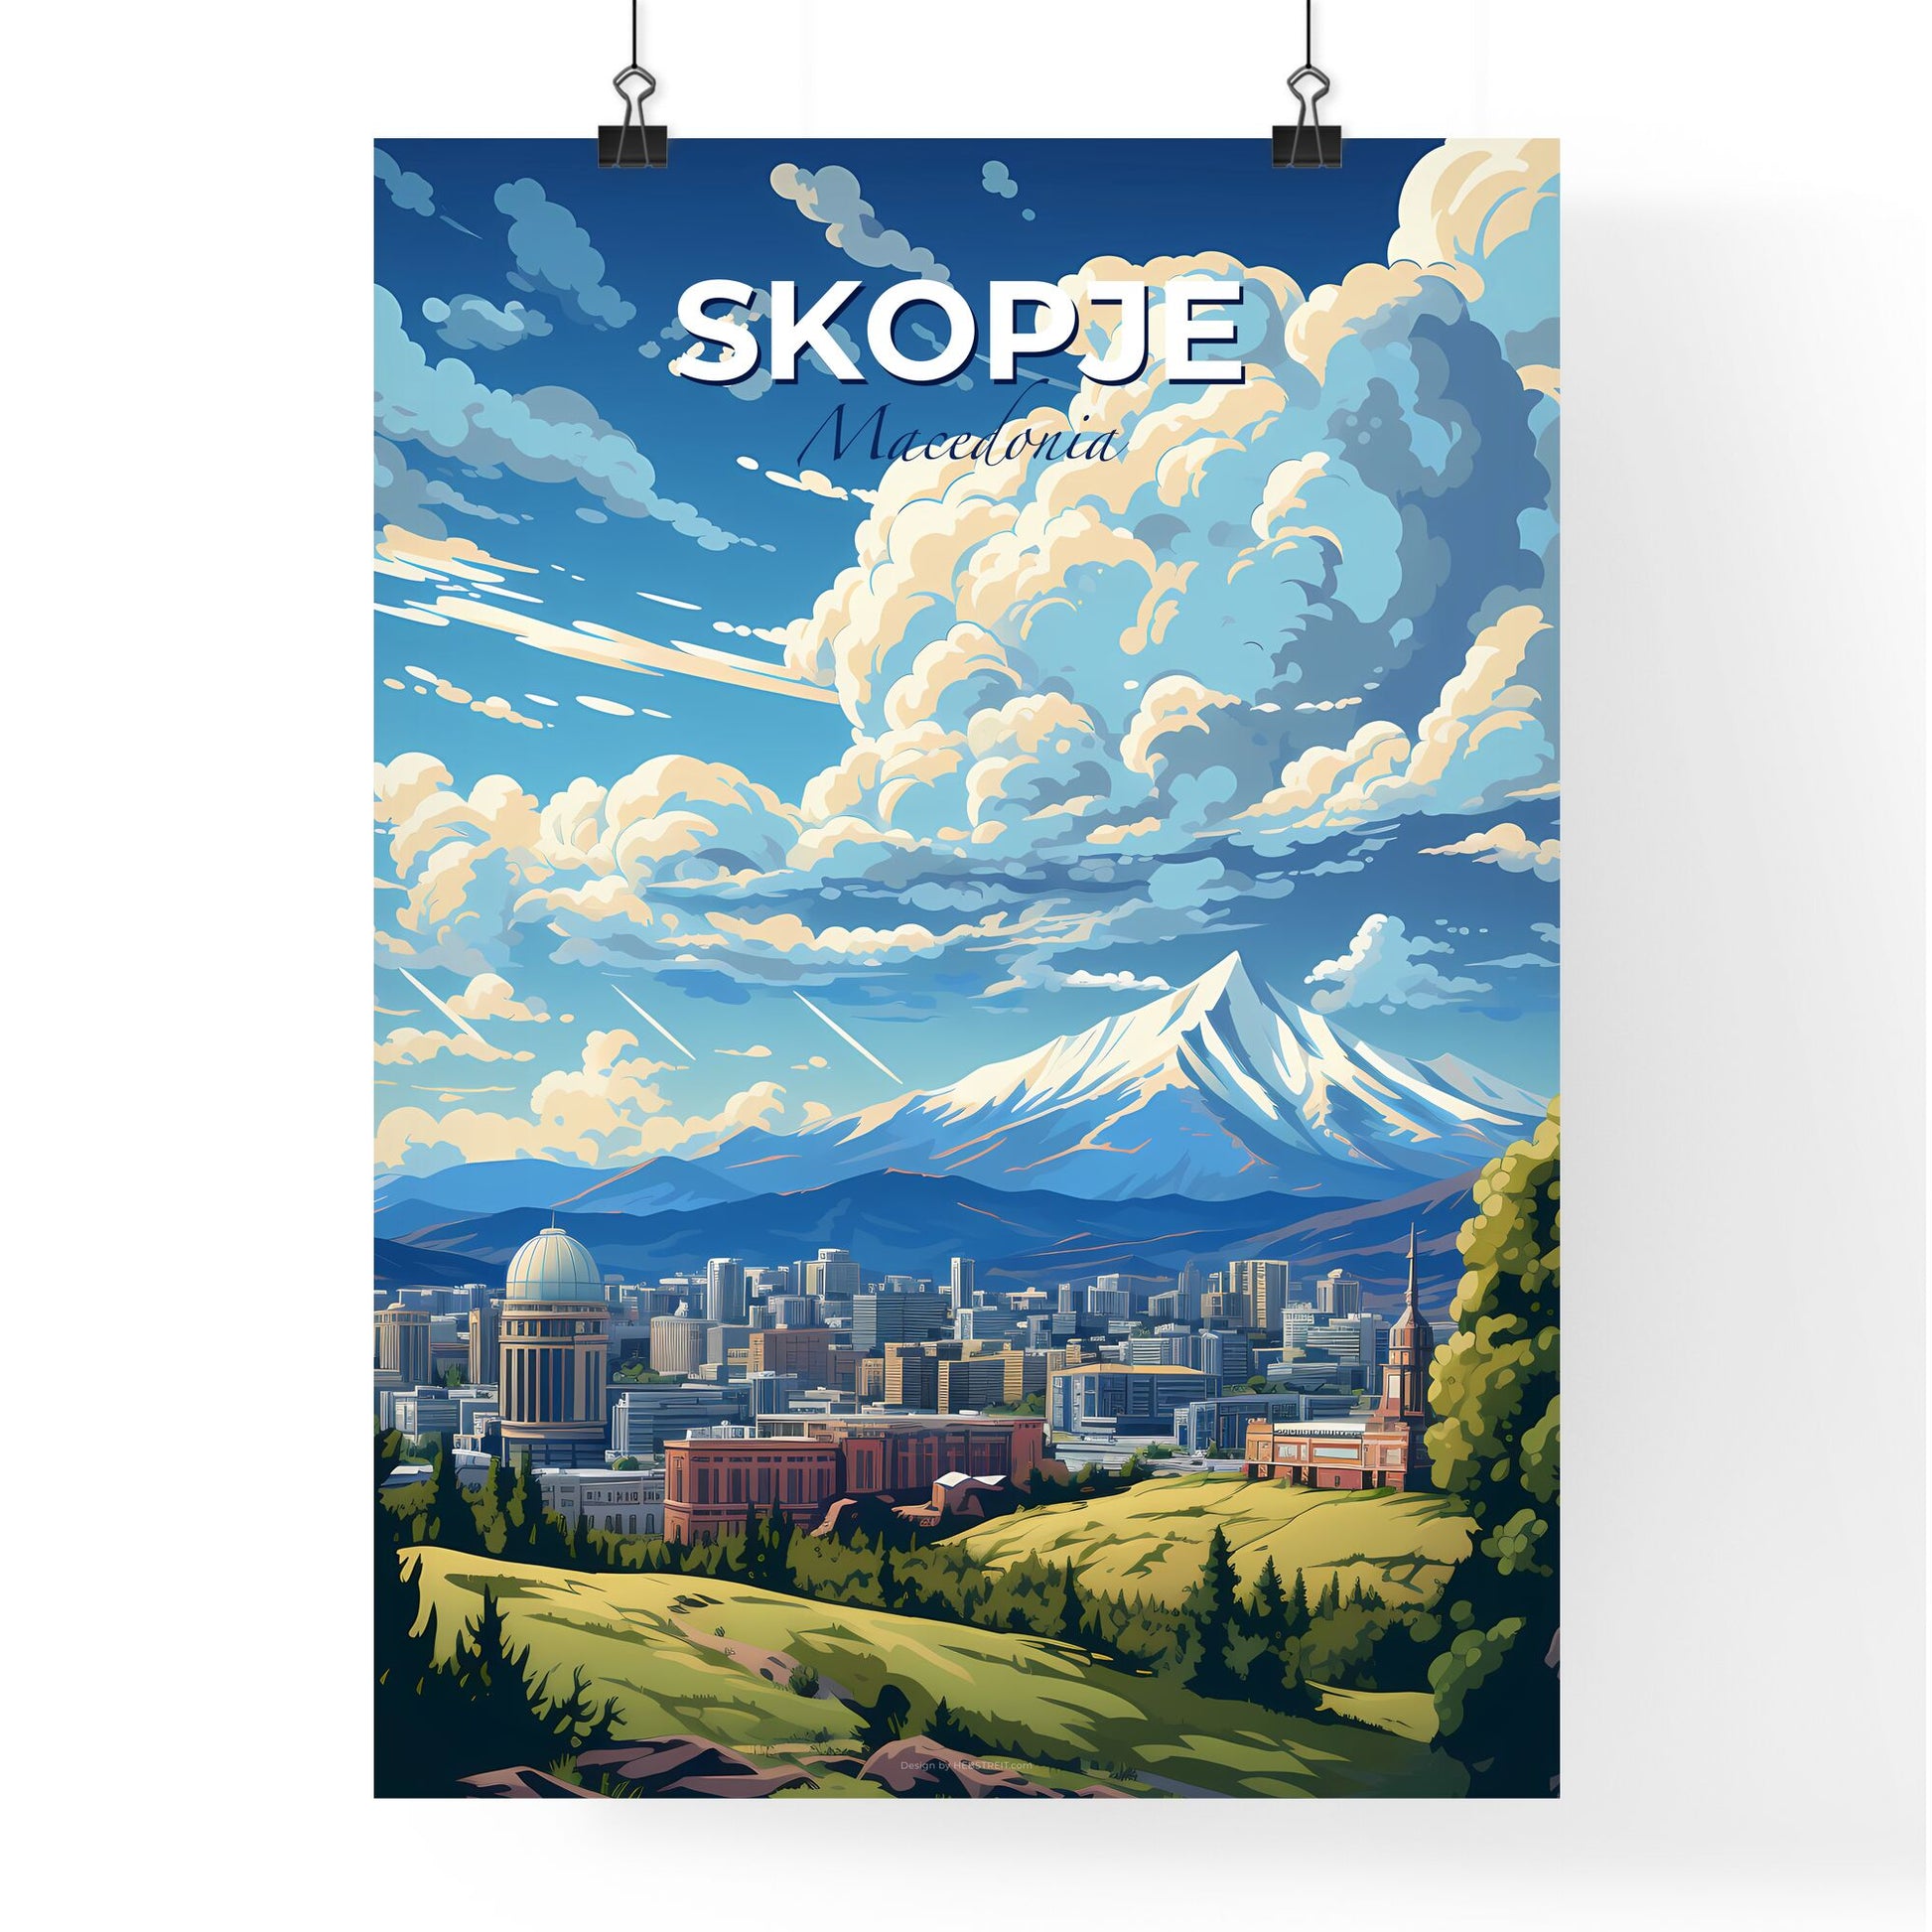 Skopje Macedonia Skyline - A City With Mountains In The Background - Customizable Travel Gift Default Title